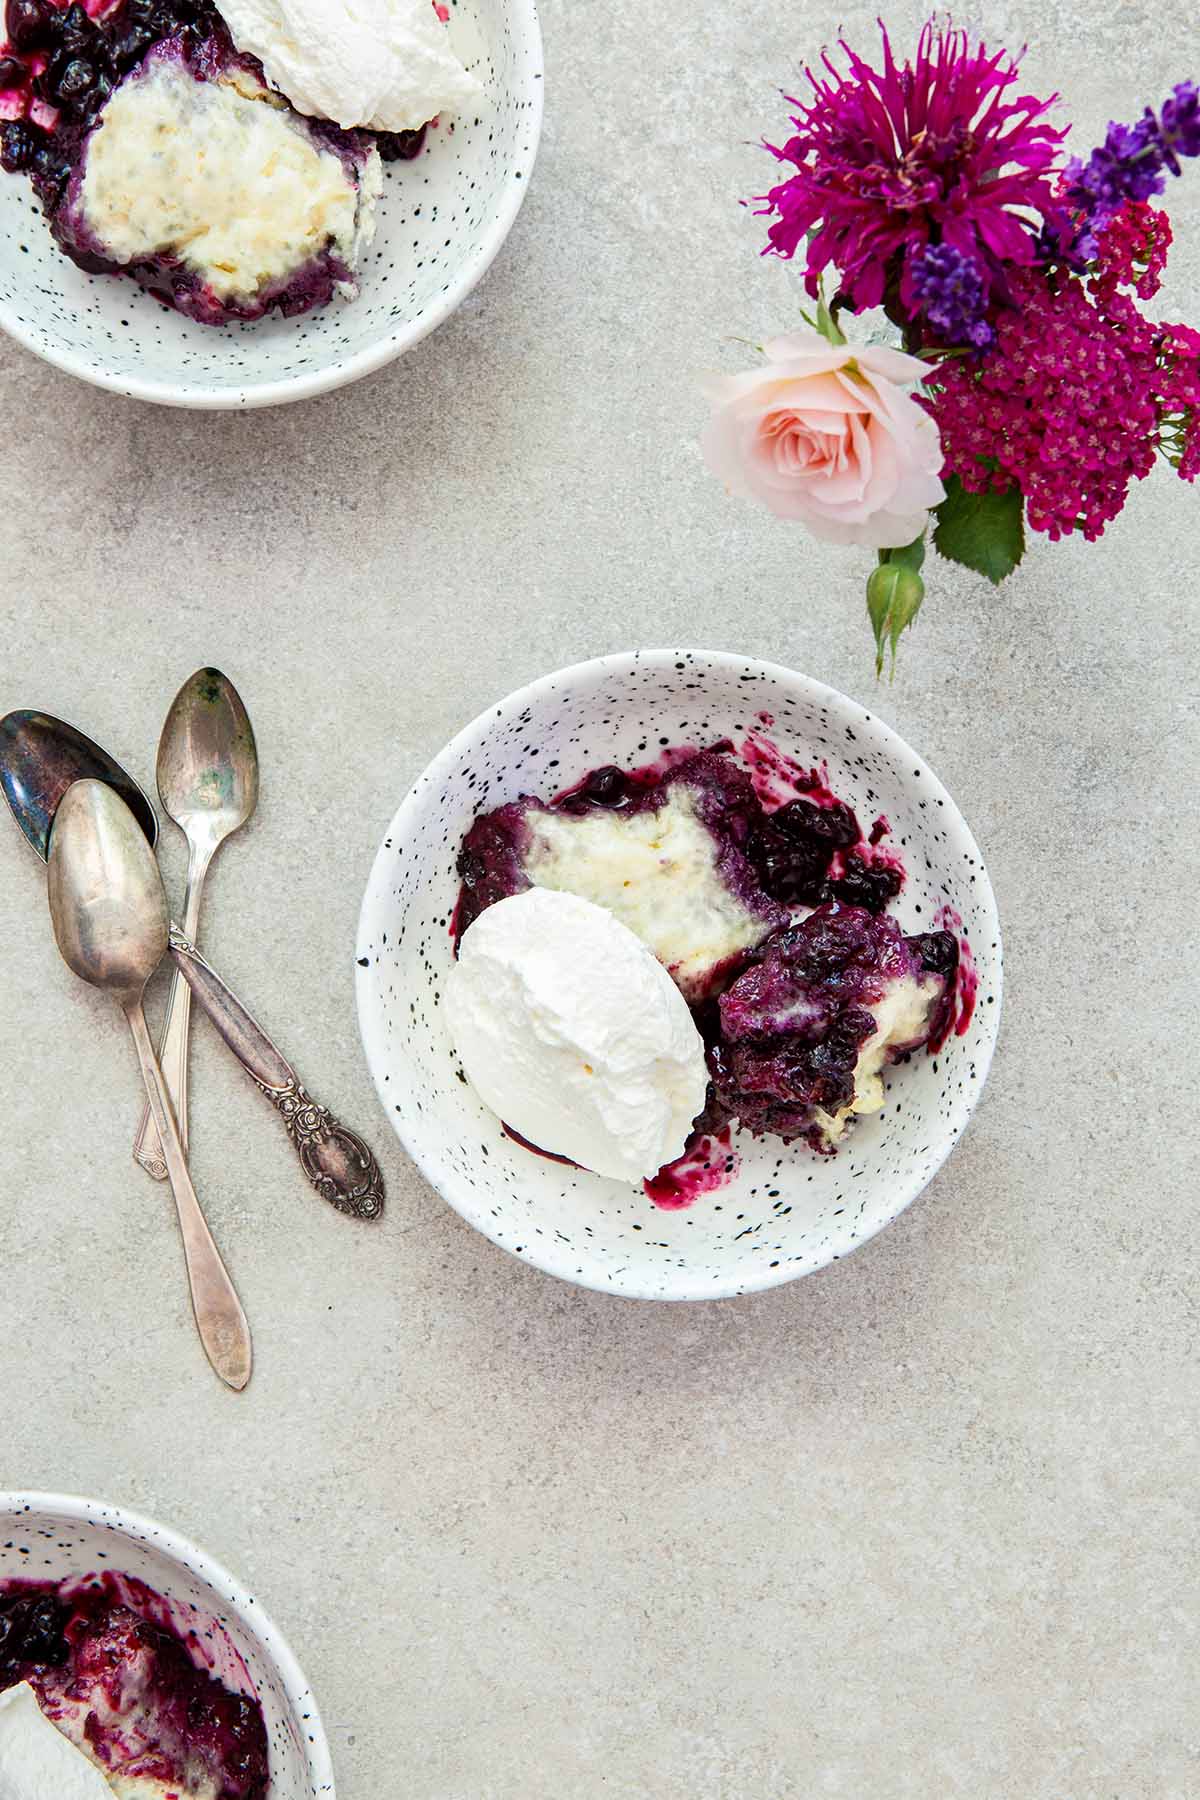 Three servings of blueberry grunt with whipped cream in small speckled bowls on a stone surface next to a vase of pink and purple flowers.